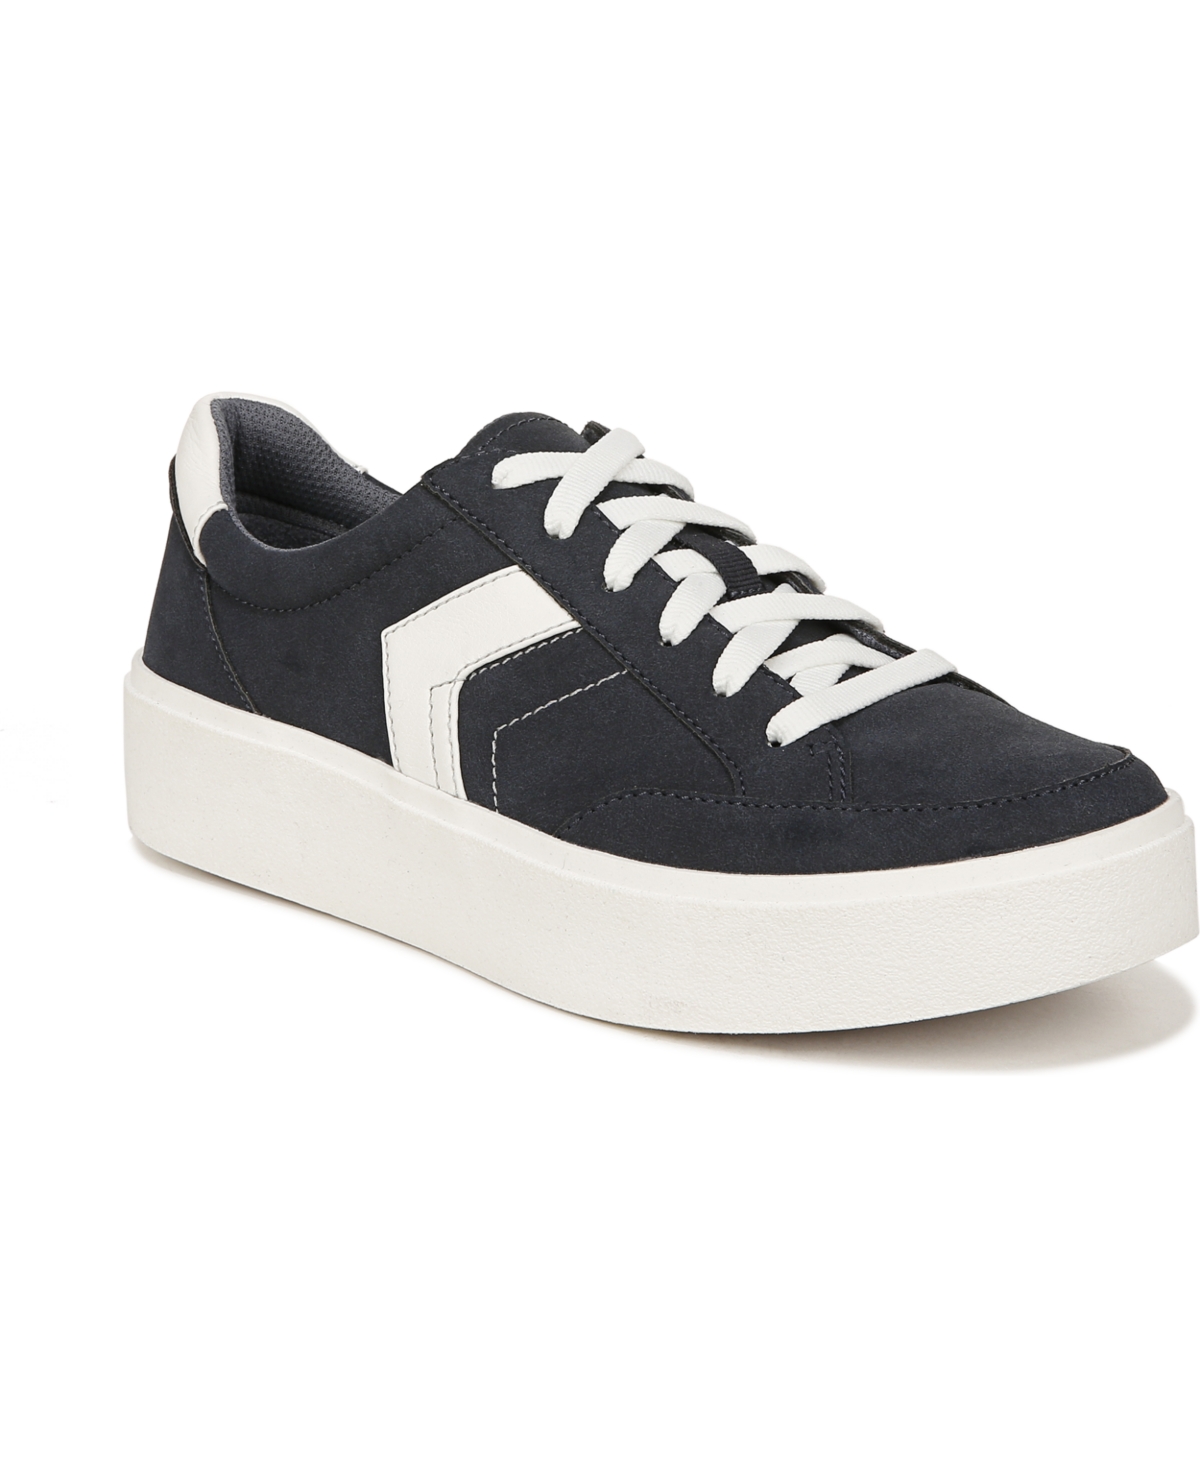 Dr. Scholl's Women's Madison-lace Sneakers In Navy Microfiber